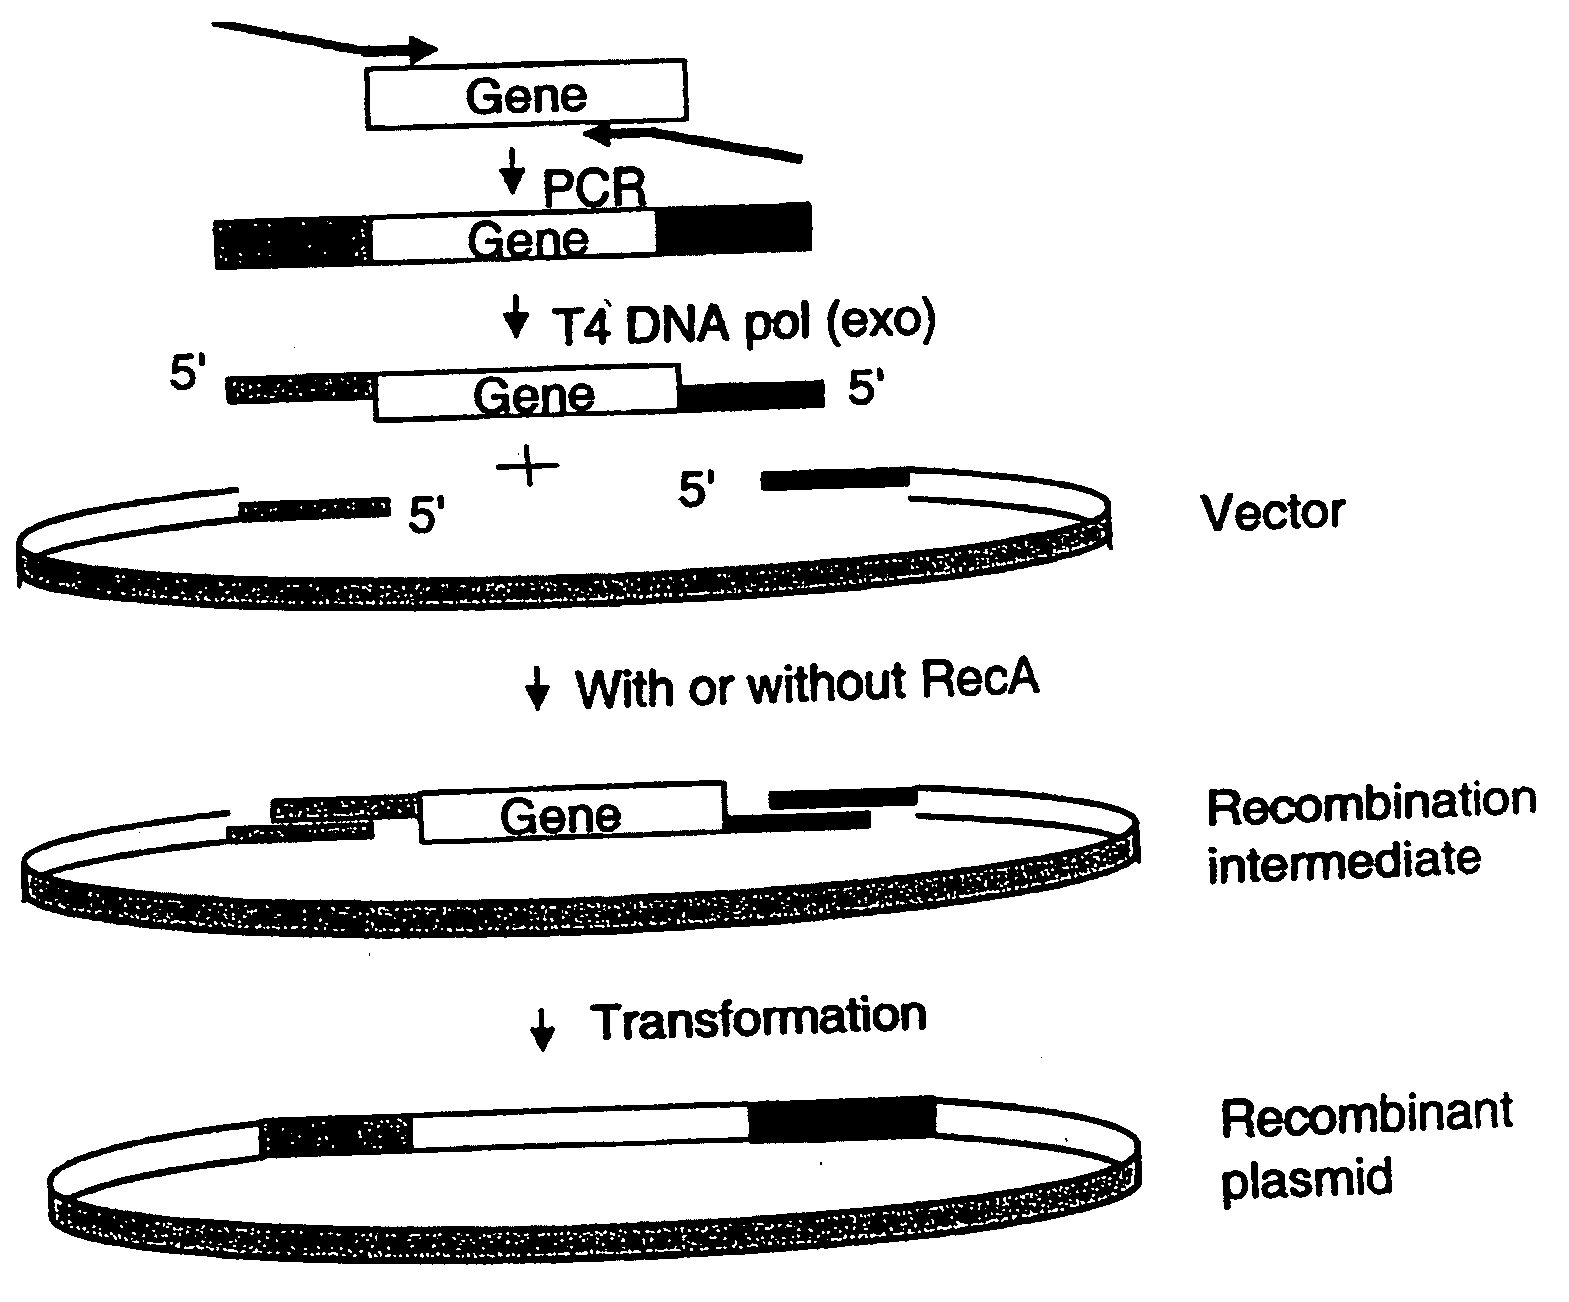 Generation of recombinant DNA by sequence-and ligation-independent cloning